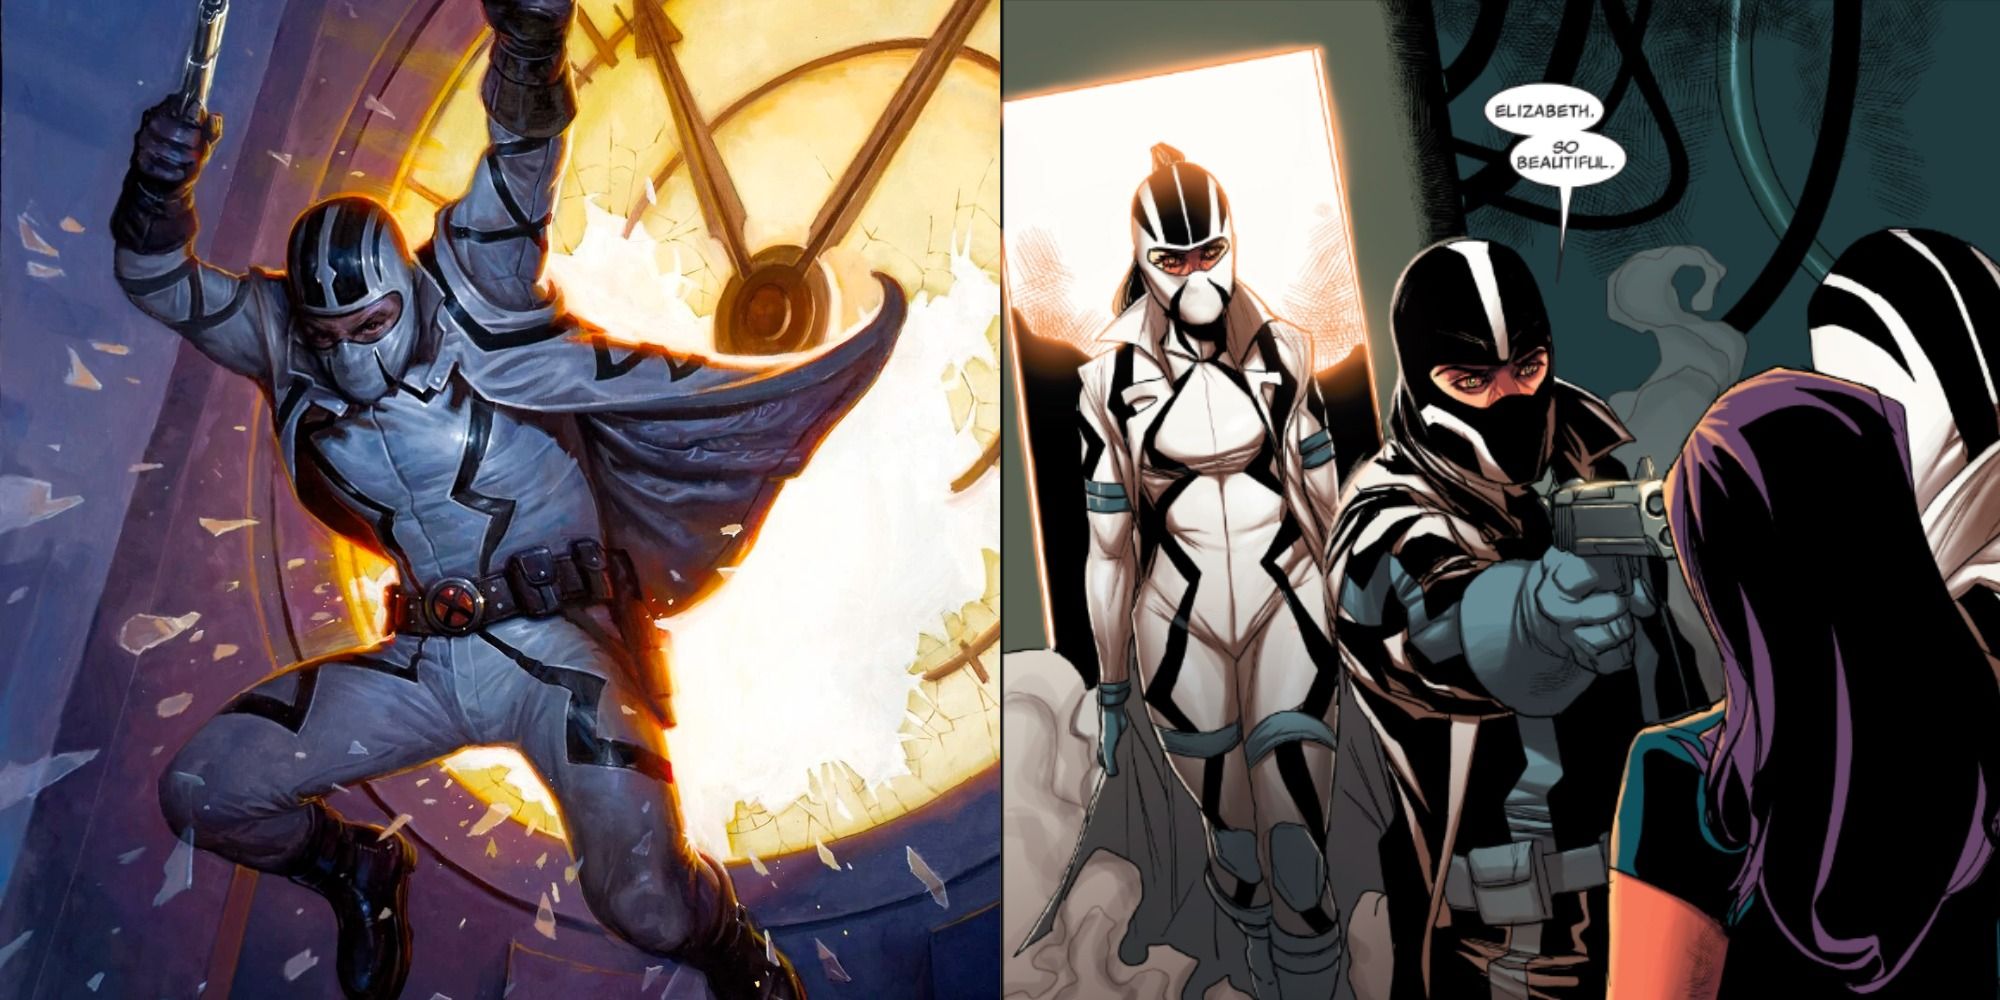 side by side images of Fantomex and his clones Lady Fantomex and Dark Fantomex